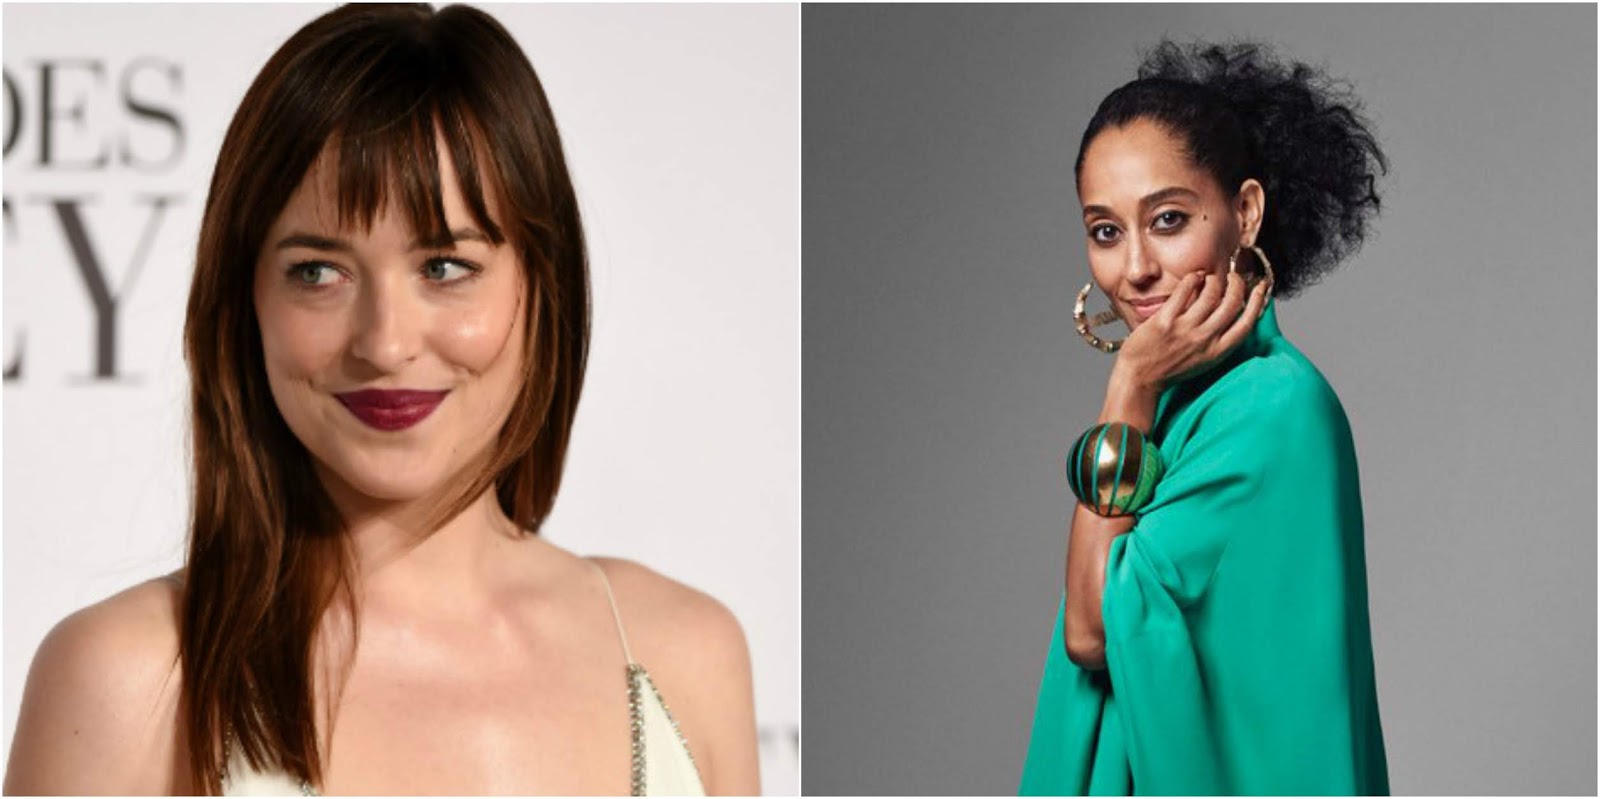 Dakota Johnson and Tracee Ellis Ross To Star In Covers